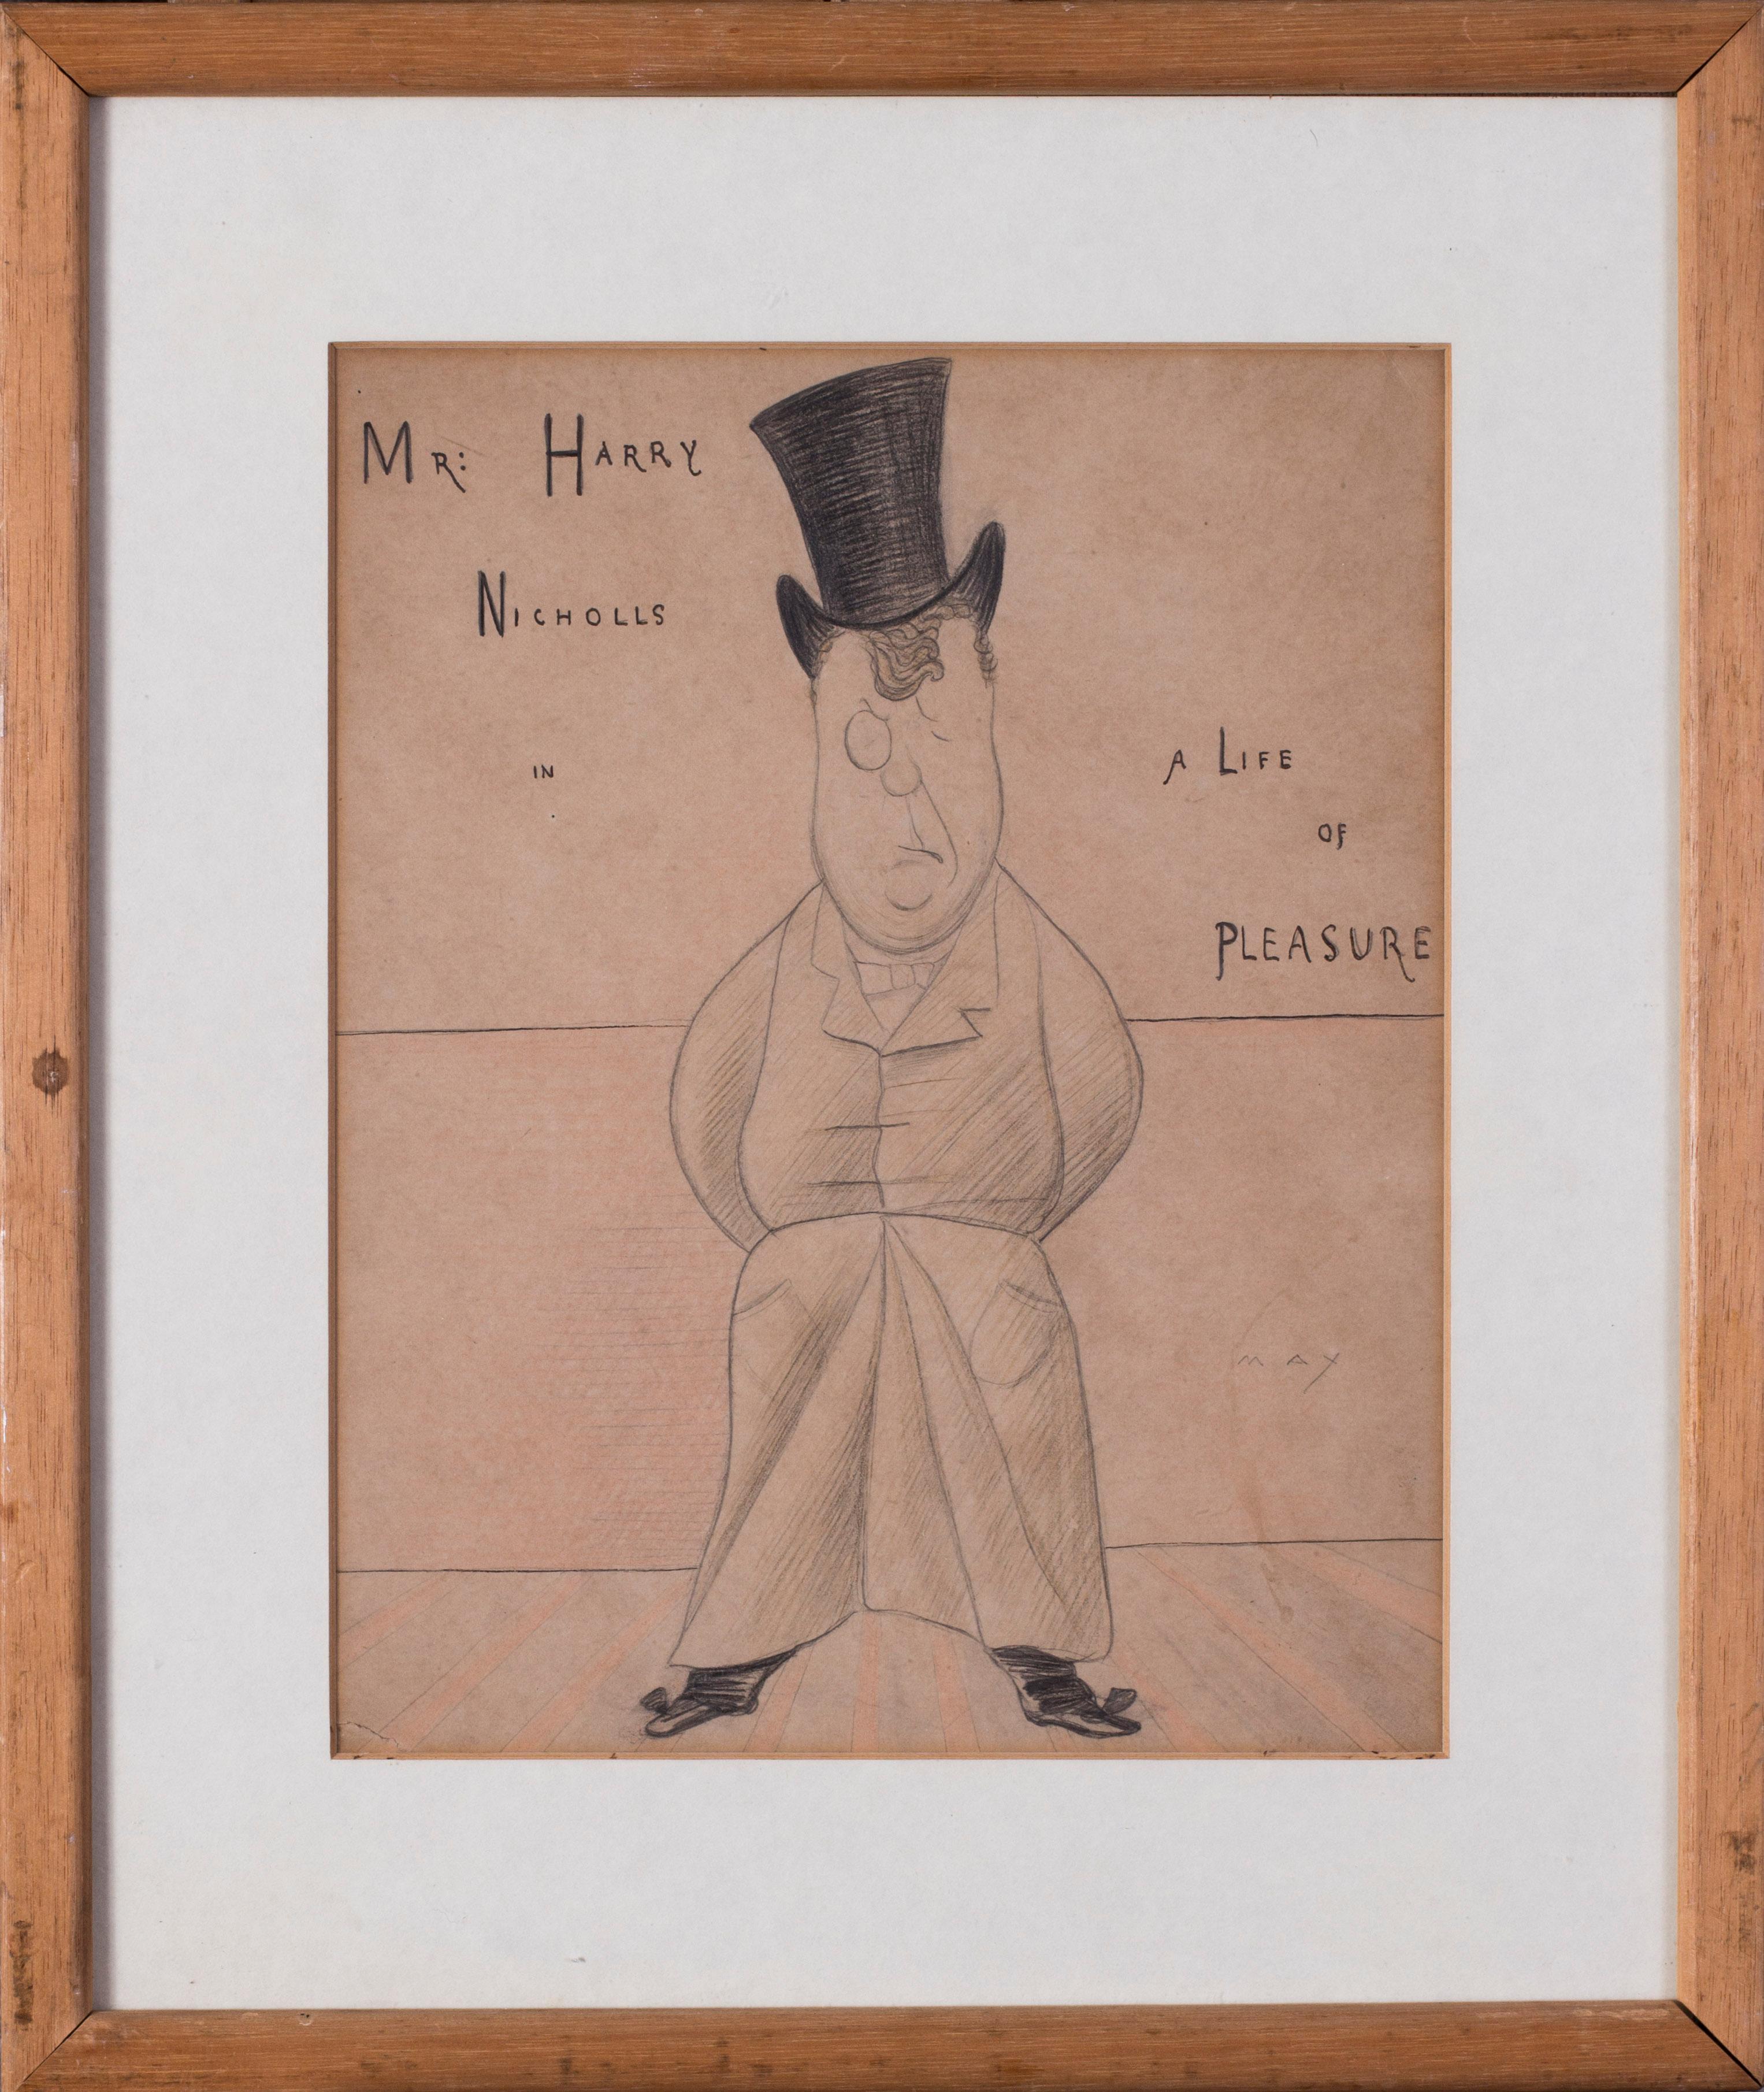 Max Beerbohm (British, 1872 – 1956)
Mr Harry Nicholls (In a life of pleasure), 1893
Signed ‘MAX’ (lower right), inscribed with title in ink
Pencil on paper with evidence of some watercolour
11 x 8.5/8 in. (28 x 22 cm.)

Henry Thomas "Harry" Nicholls